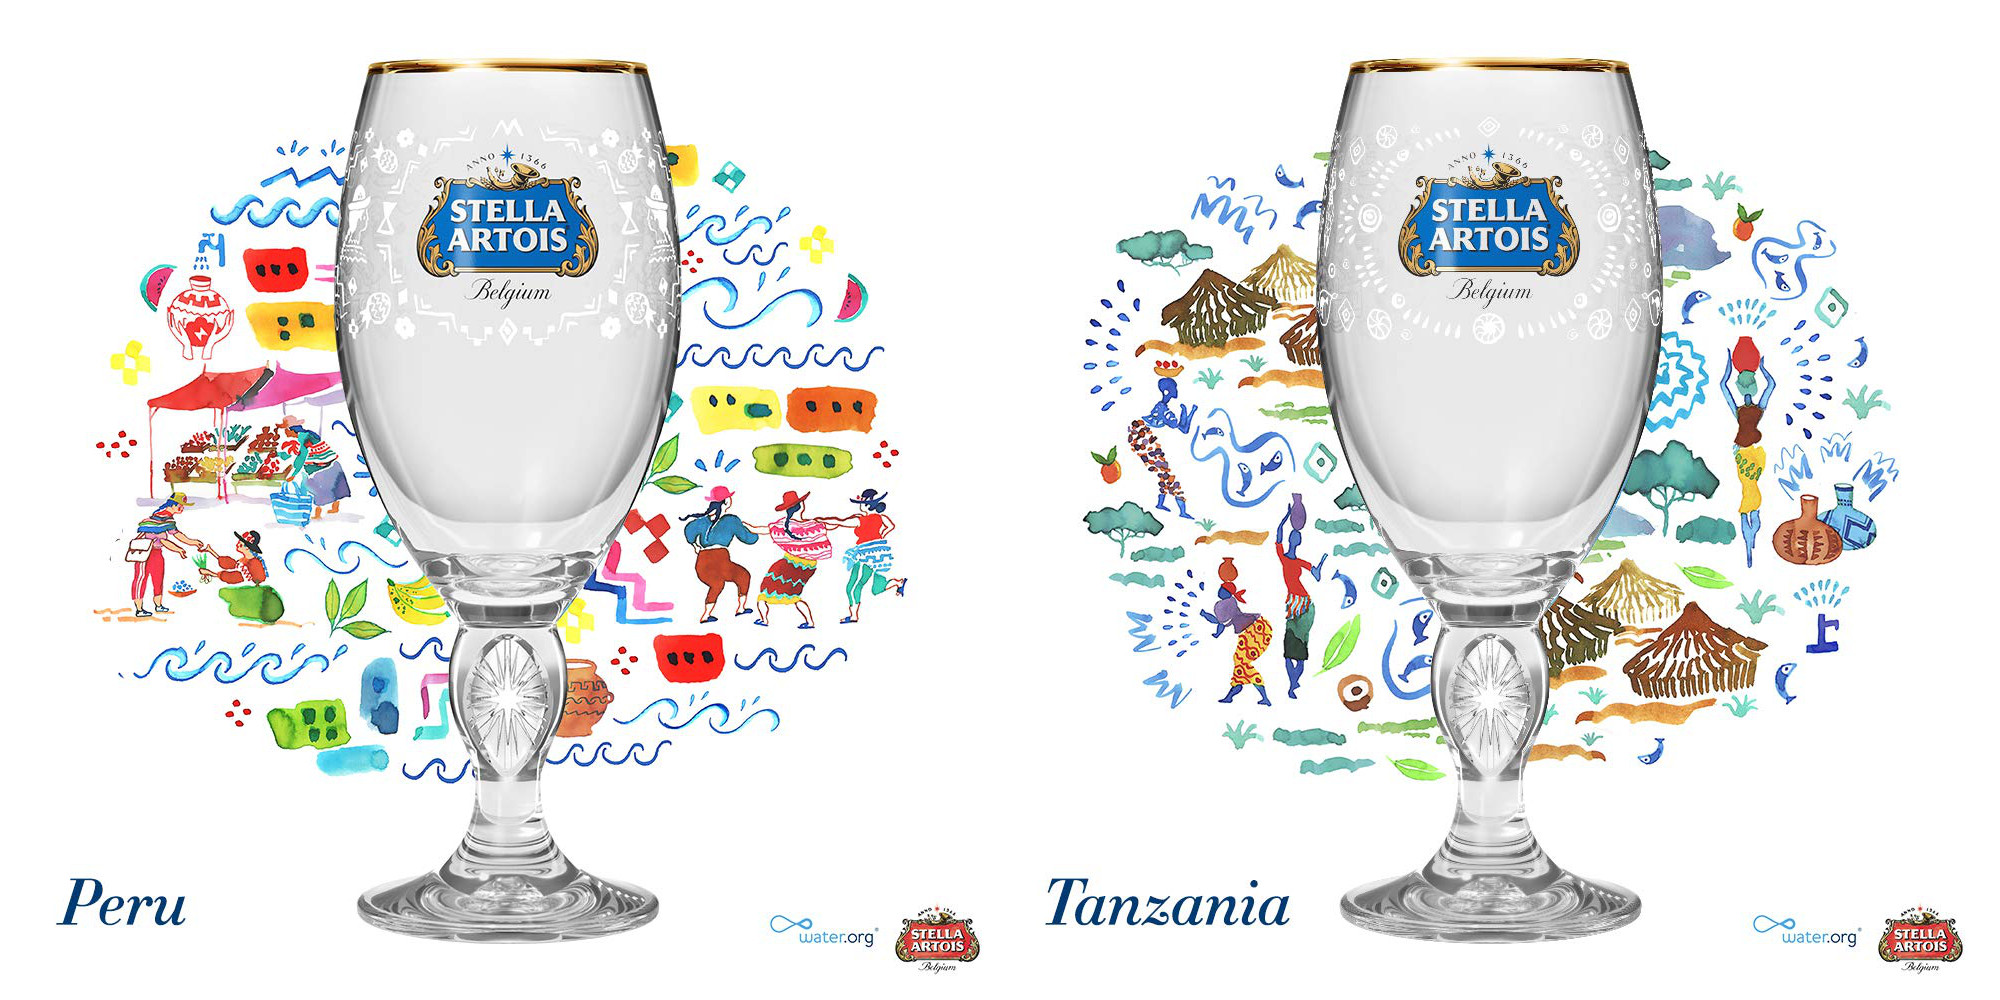 https://9to5toys.com/wp-content/uploads/sites/5/2019/06/Stella-Artois-2019-Limited-Edition-Chalices.jpg